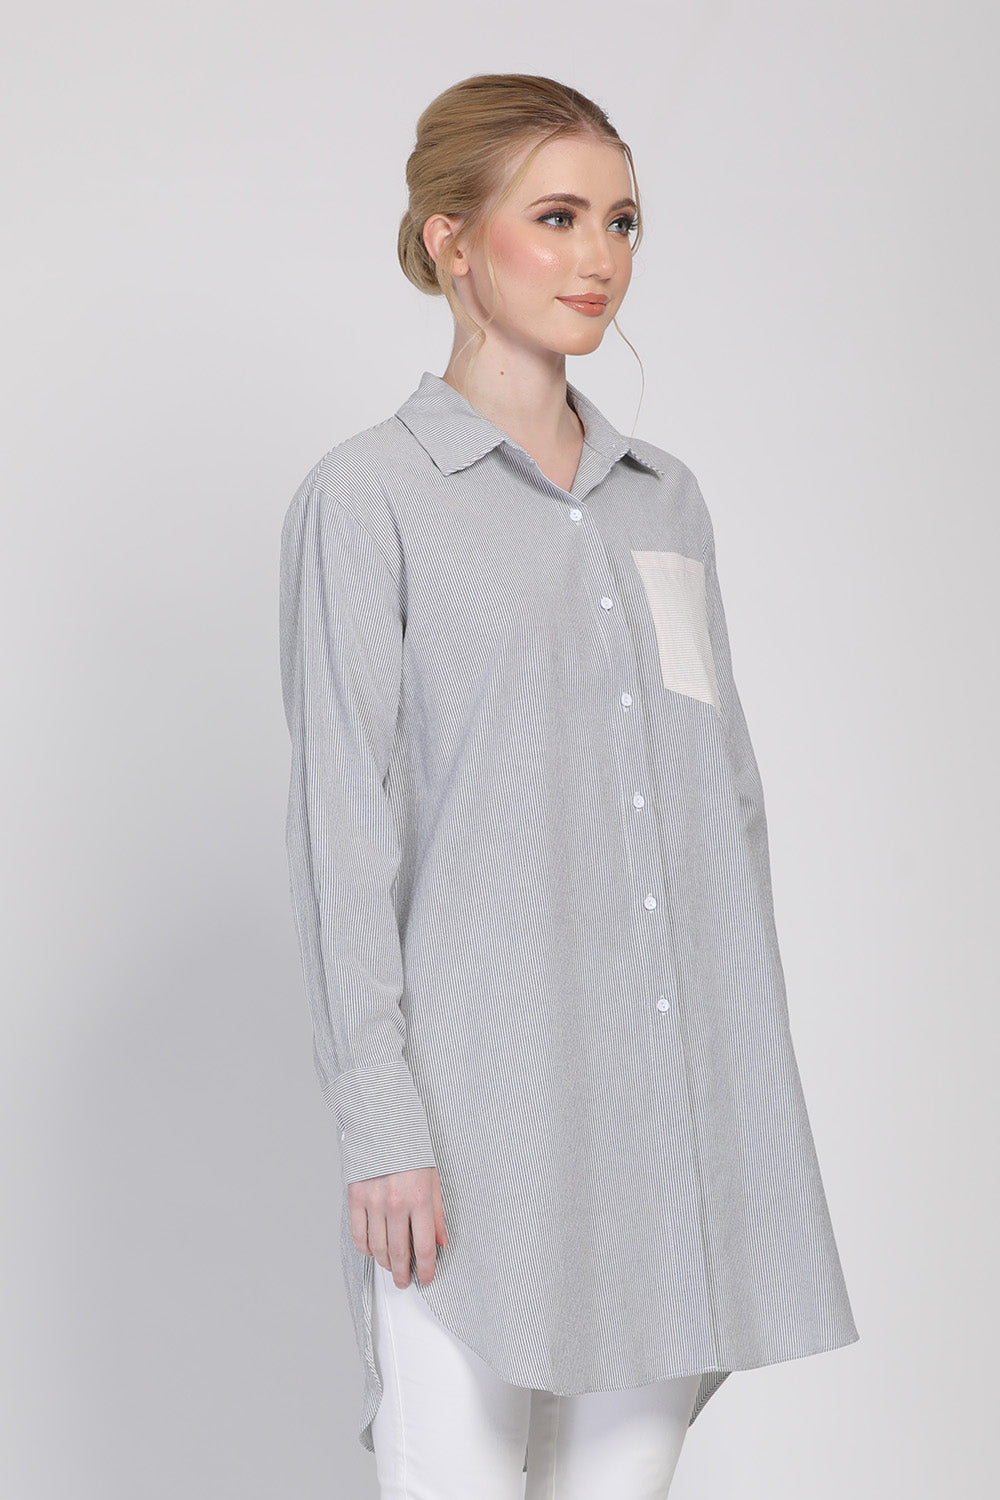 The Remix Tunic Shirt in Black/Apricot